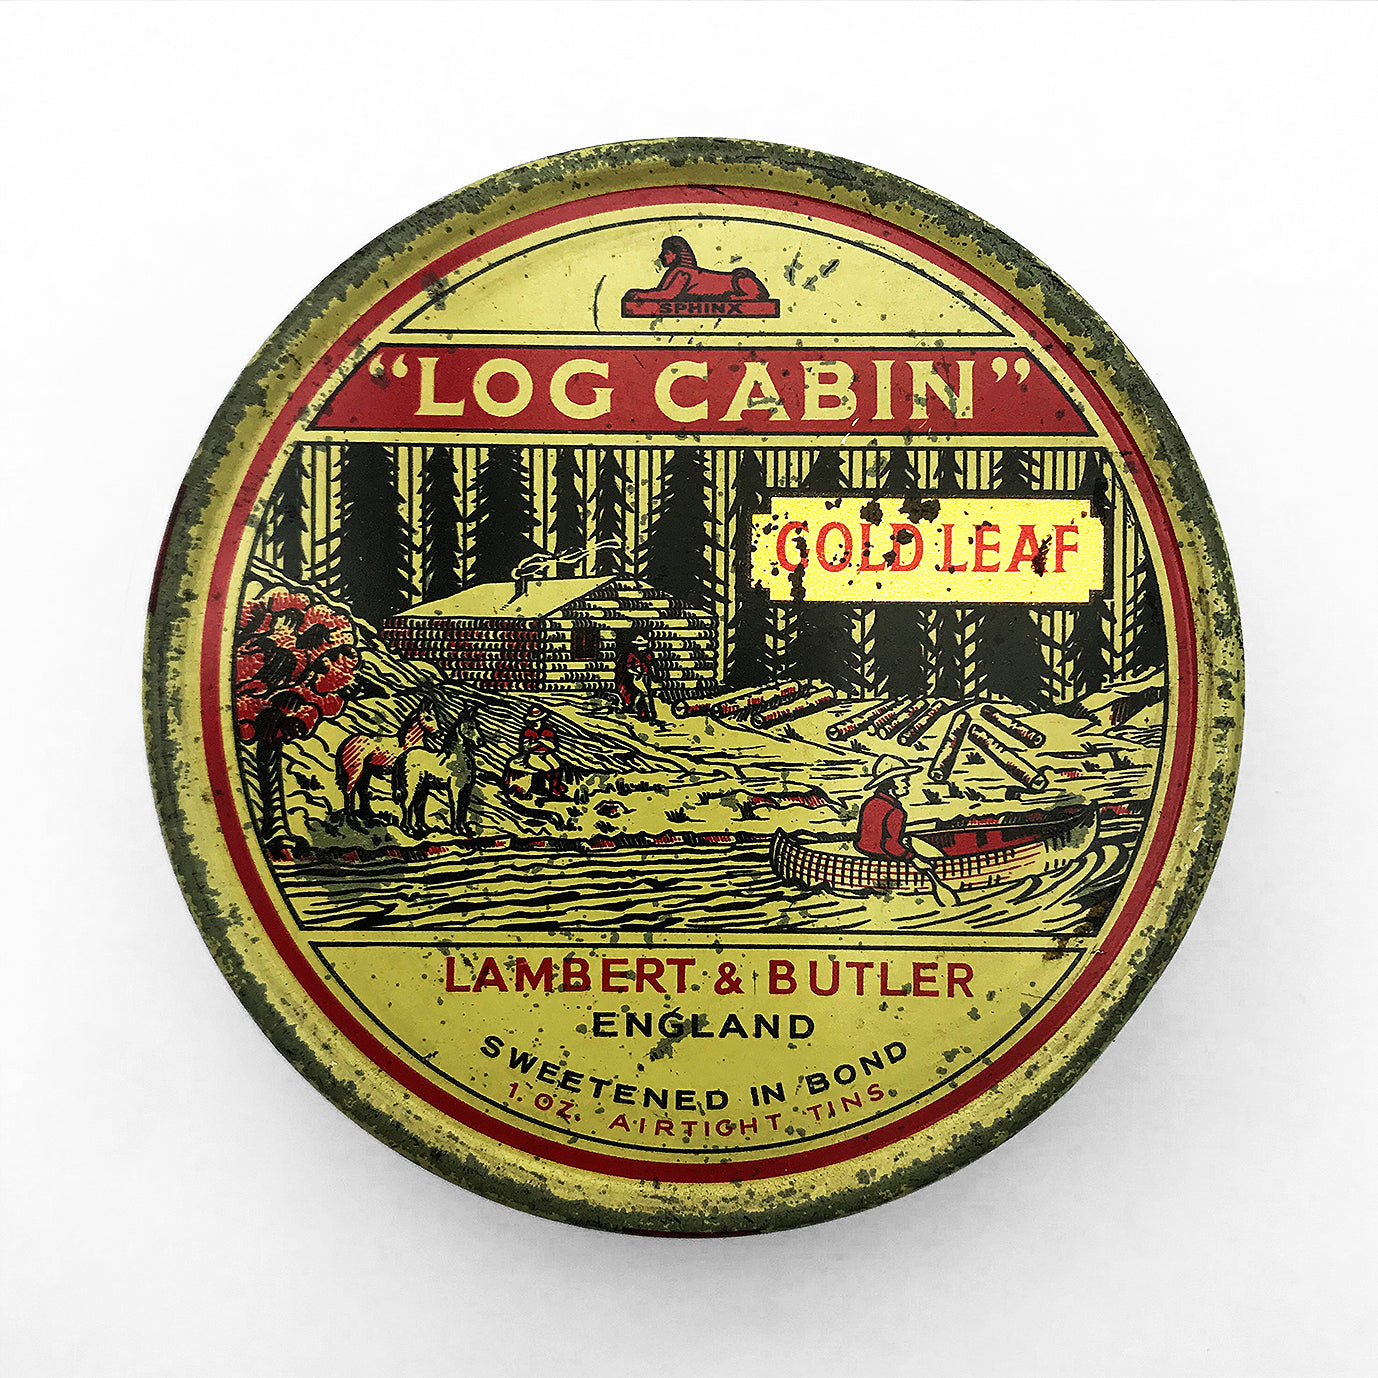 A sort after rare Vintage 1oz Log Cabin Gold Leaf Tobacco Tin by Lambert & Butler. It has a wonderful camping scene on the lid - SHOP NOW - www.intovintage.co.uk